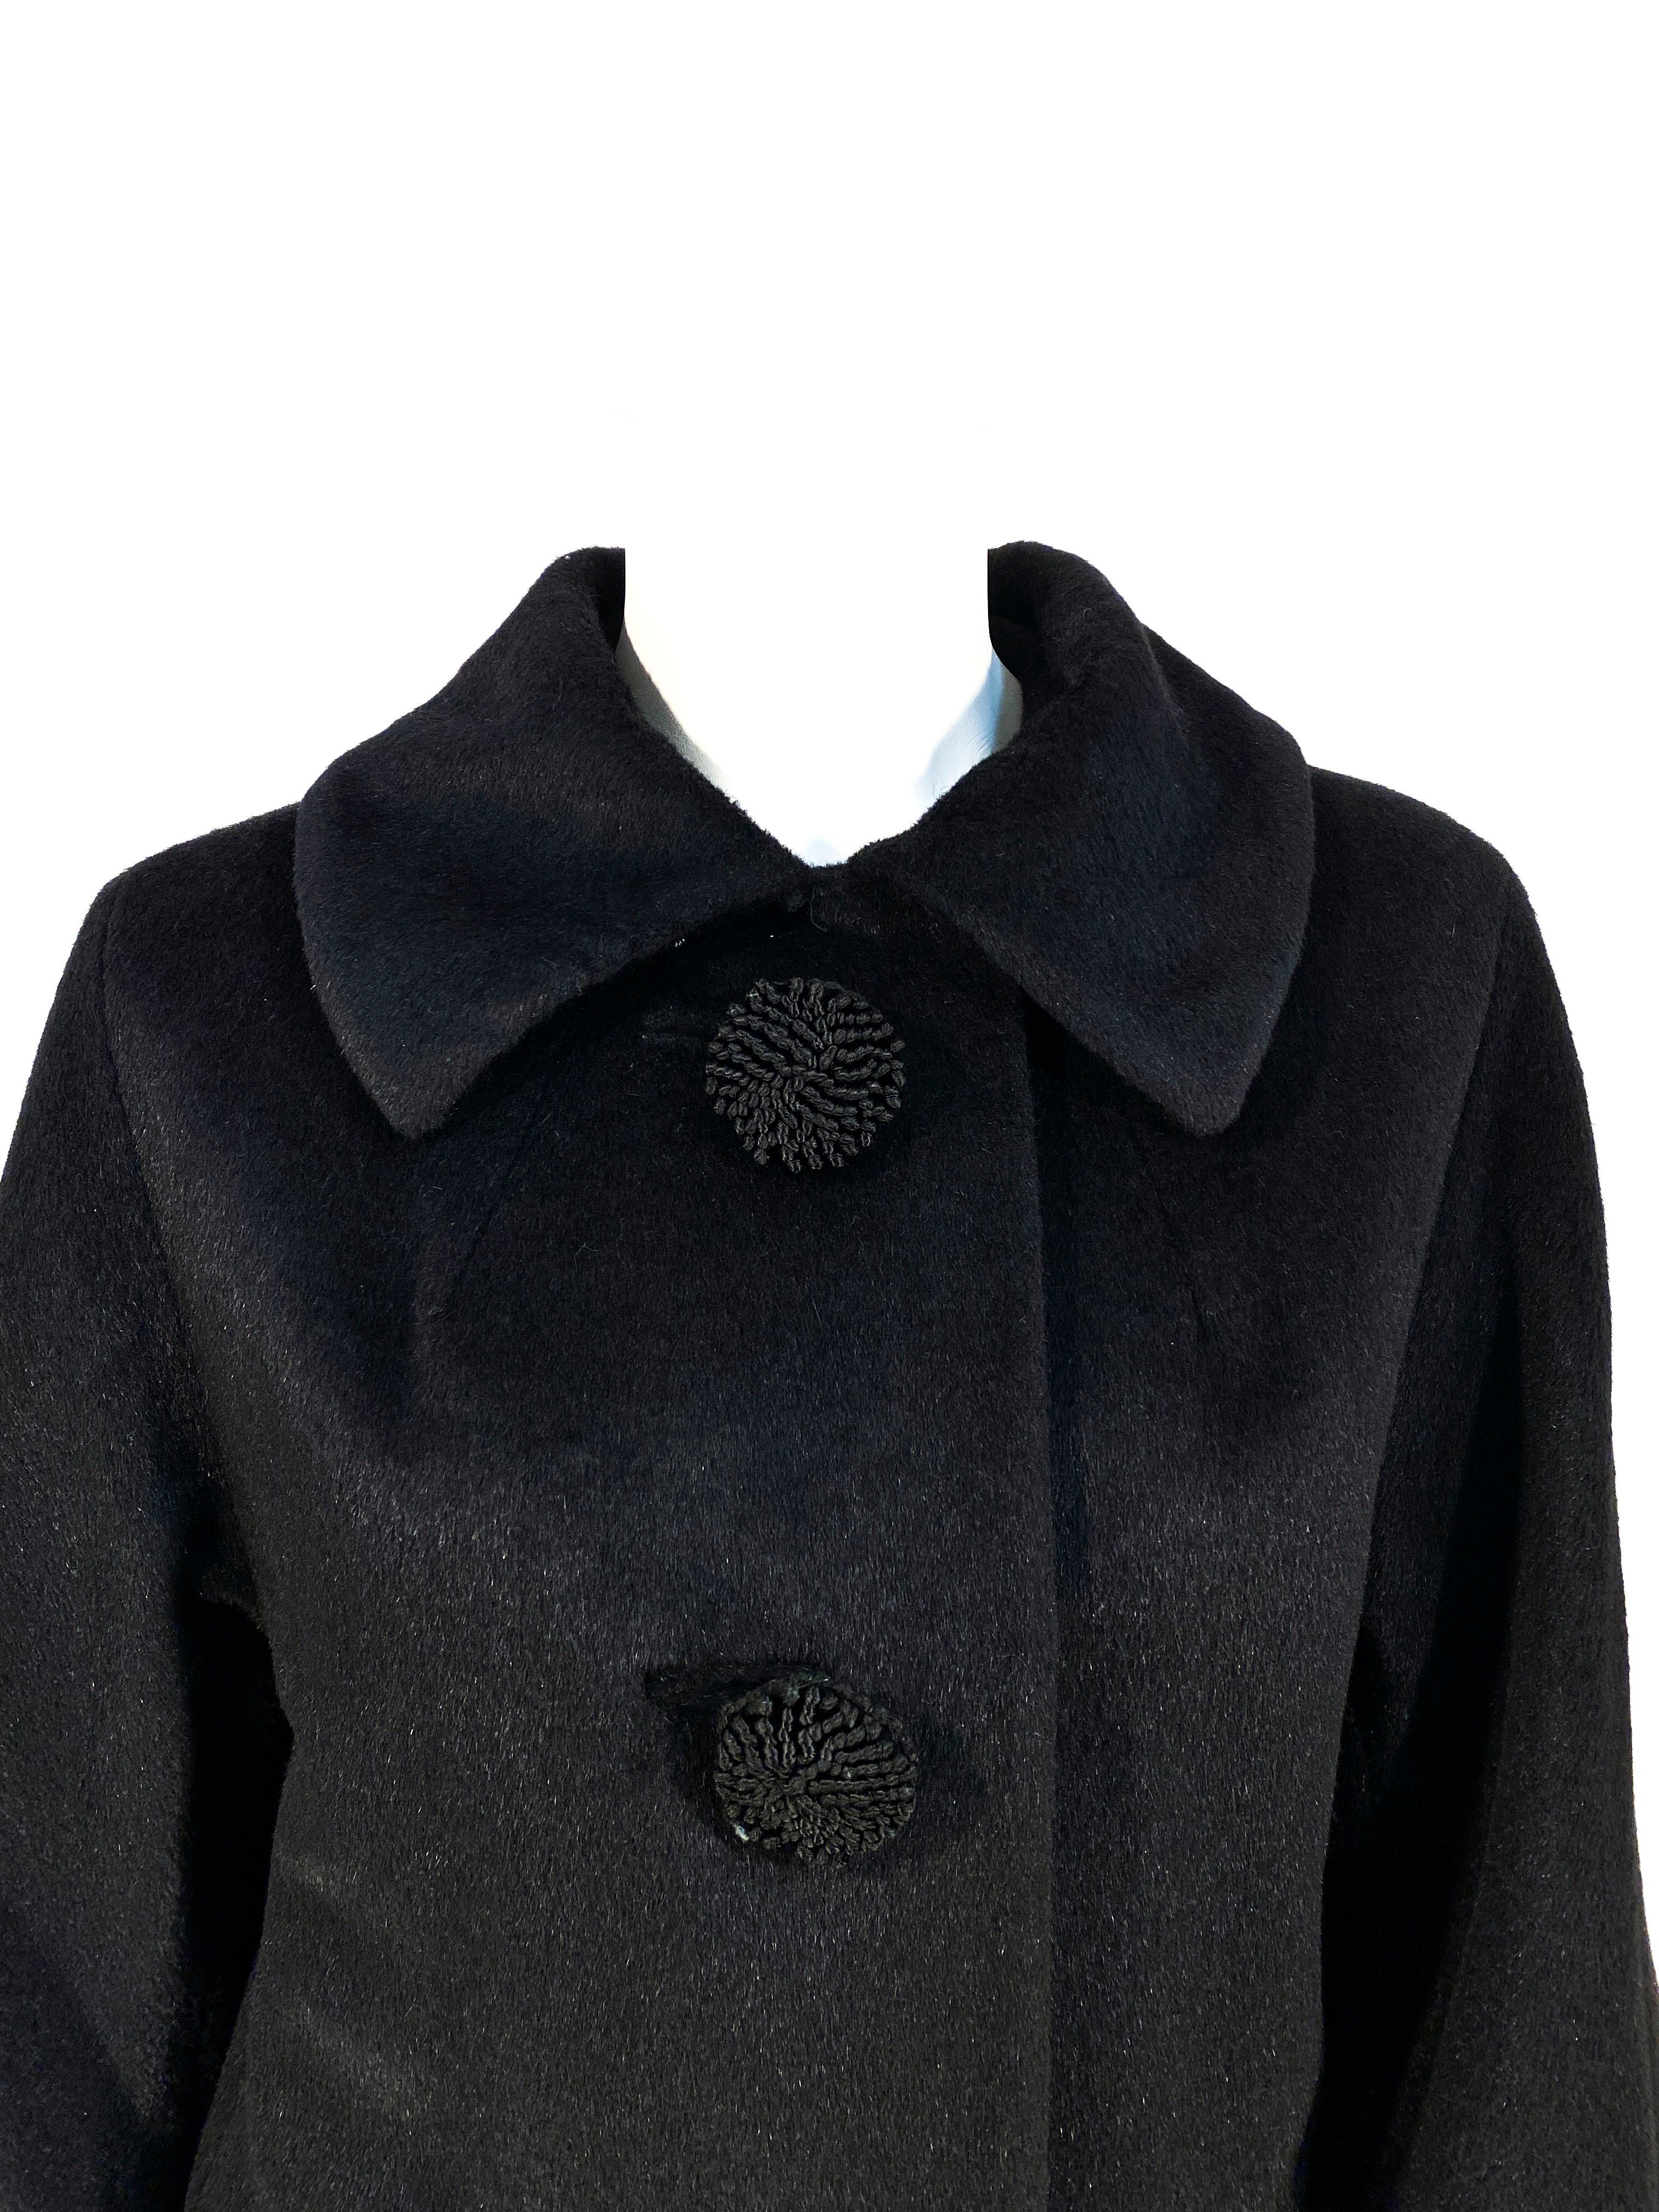 1960s Lilli Ann black cashmere coat with faux decorative soutache buttons hiding the snap closure. The faux button holes are inset, the sleeves are glove length, and the body of the coat is straight cut to the knee. The entire coat is lined with a